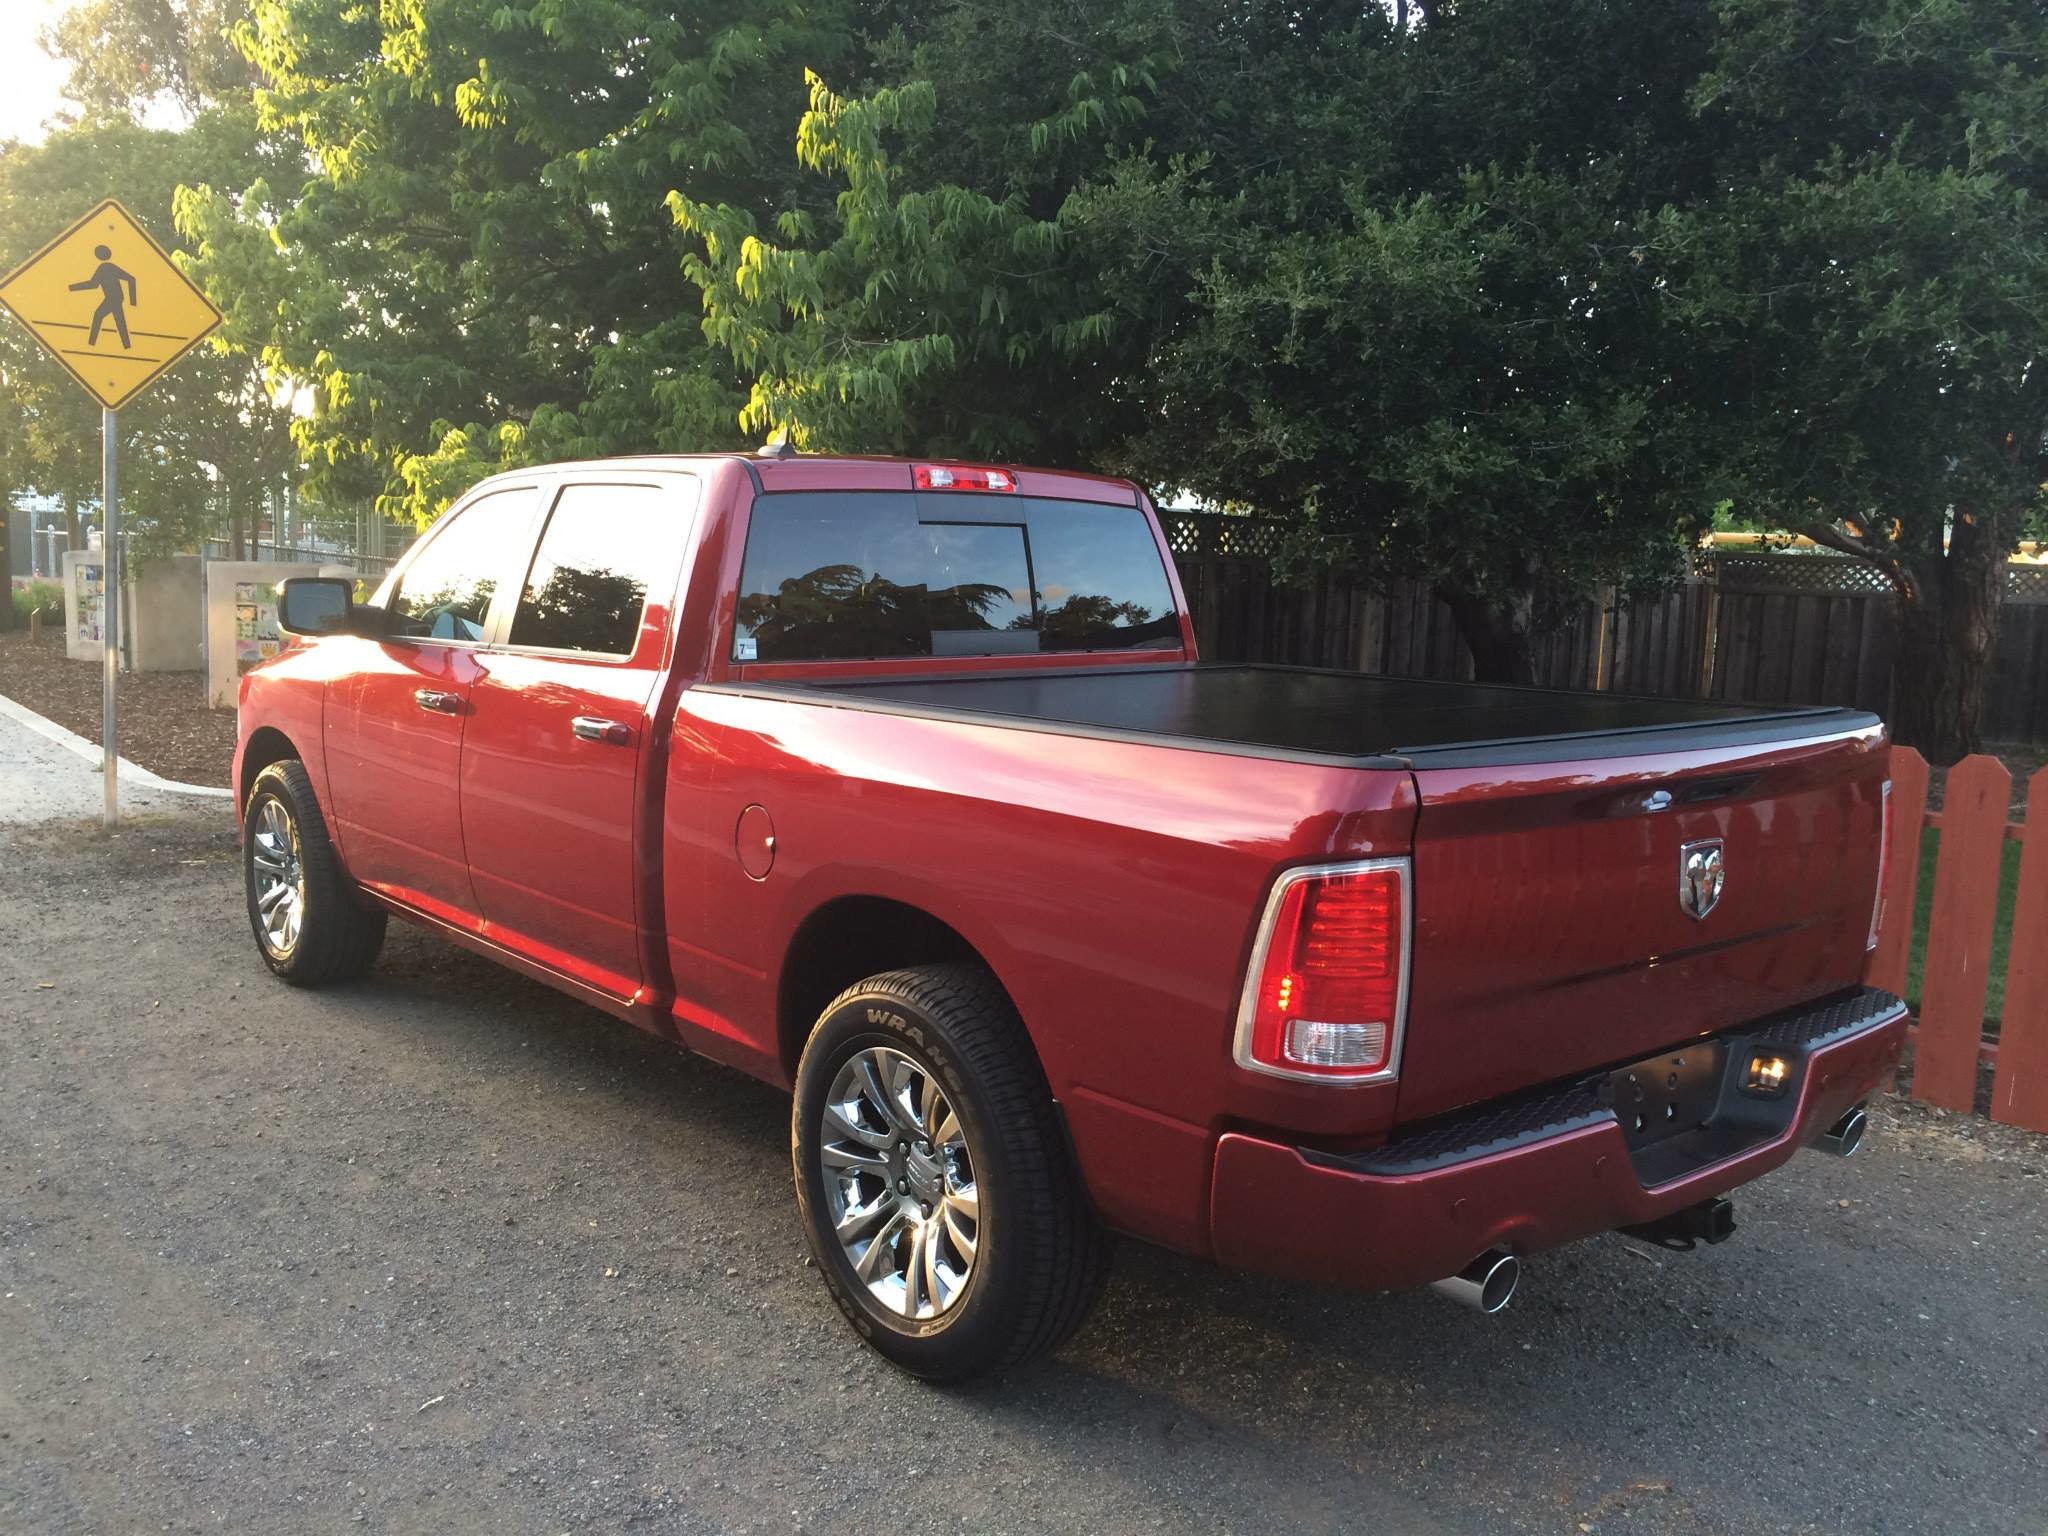 May 2014 Ram 1500 Diesel Truck of the Month Contest ram